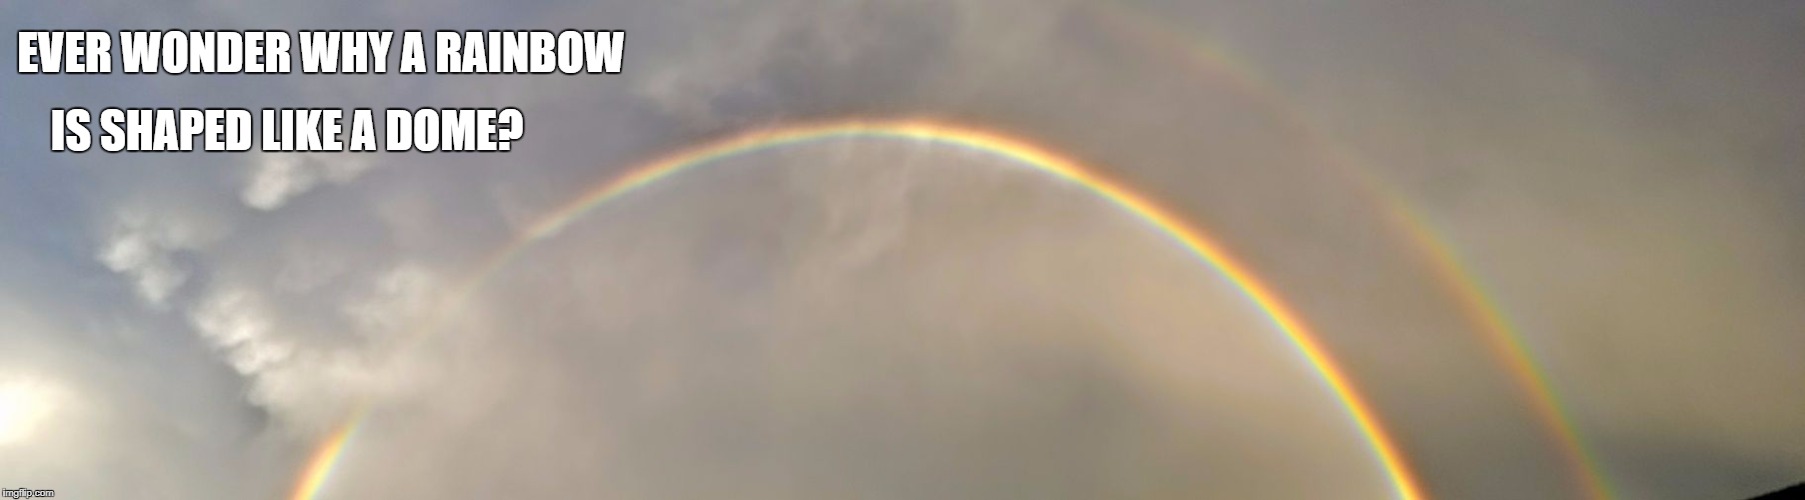 Rainbow dome | EVER WONDER WHY A RAINBOW; IS SHAPED LIKE A DOME? | image tagged in firmament,rainbow | made w/ Imgflip meme maker